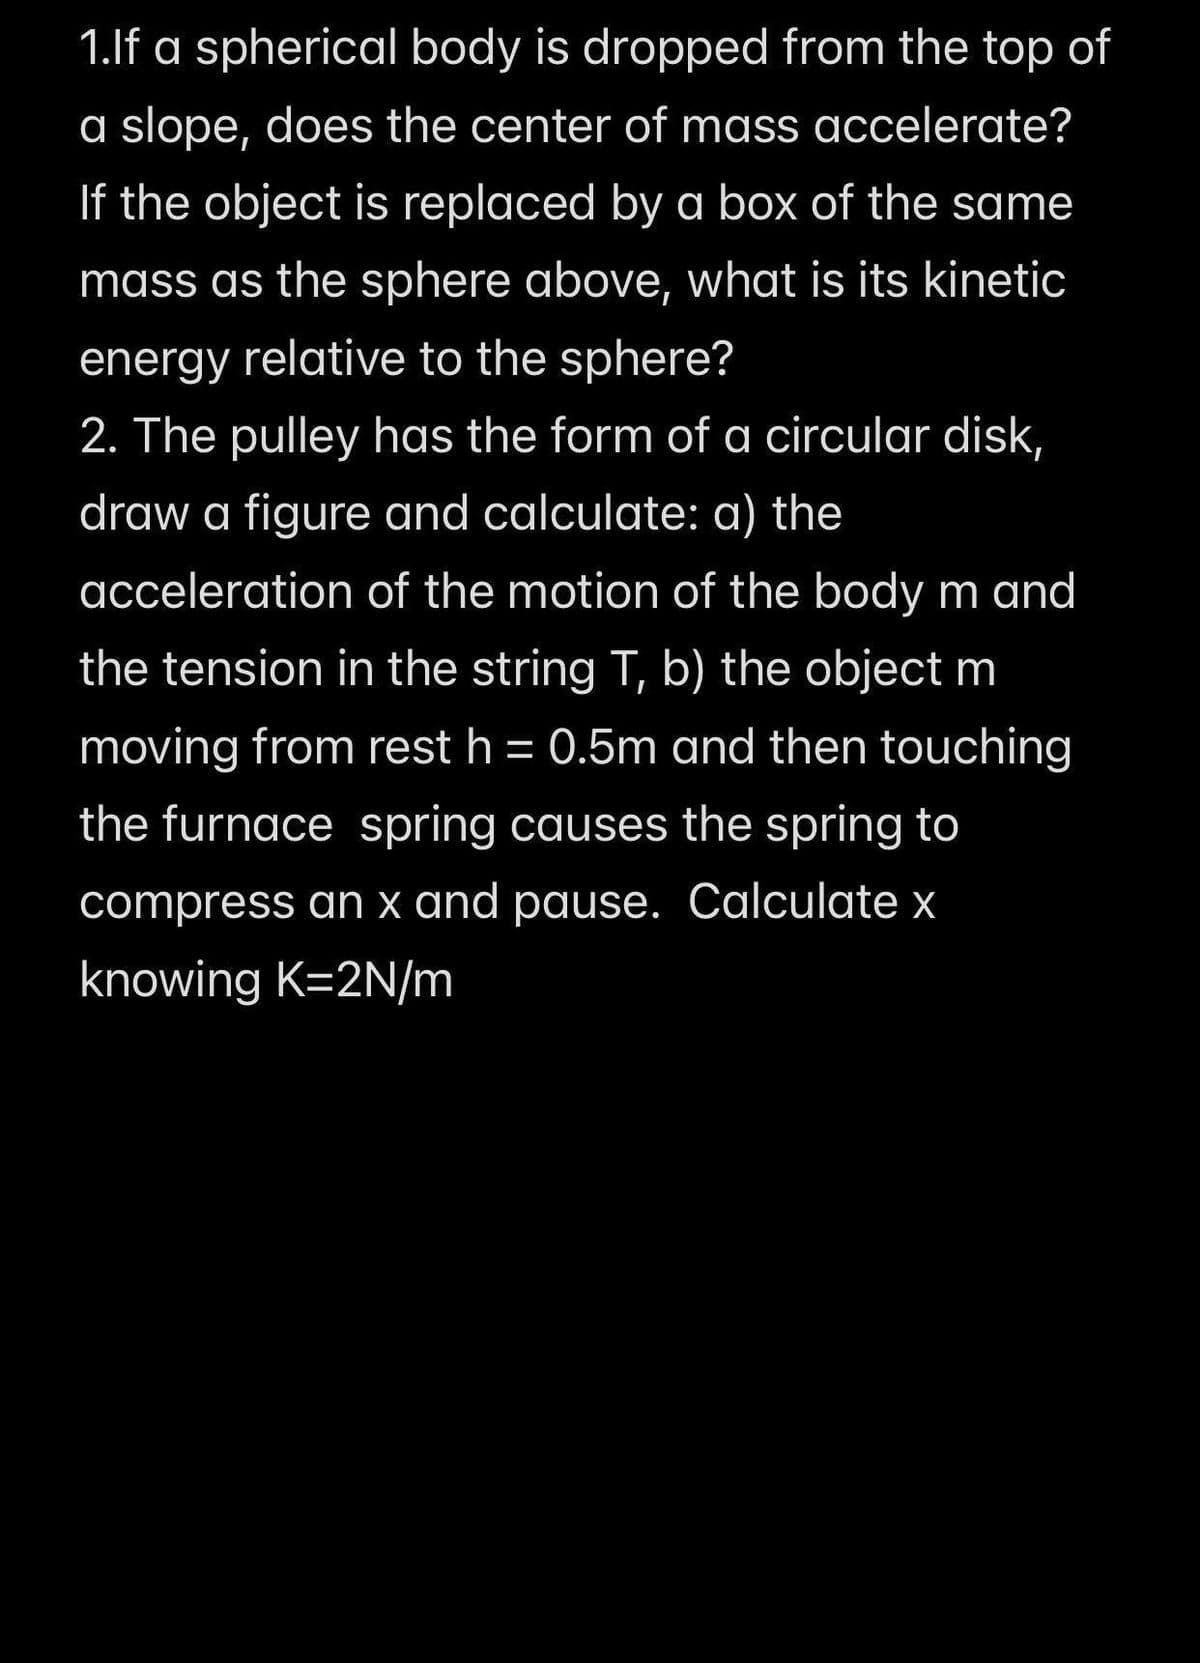 1.lf a spherical body is dropped from the top of
a slope, does the center of mass accelerate?
If the object is replaced by a box of the same
mass as the sphere above, what is its kinetic
energy relative to the sphere?
2. The pulley has the form of a circular disk,
draw a figure and calculate: a) the
acceleration of the motion of the body m and
the tension in the string T, b) the object m
moving from rest h = 0.5m and then touching
%3D
the furnace spring causes the spring to
compress an x and pause. Calculate x
knowing K=2N/m
